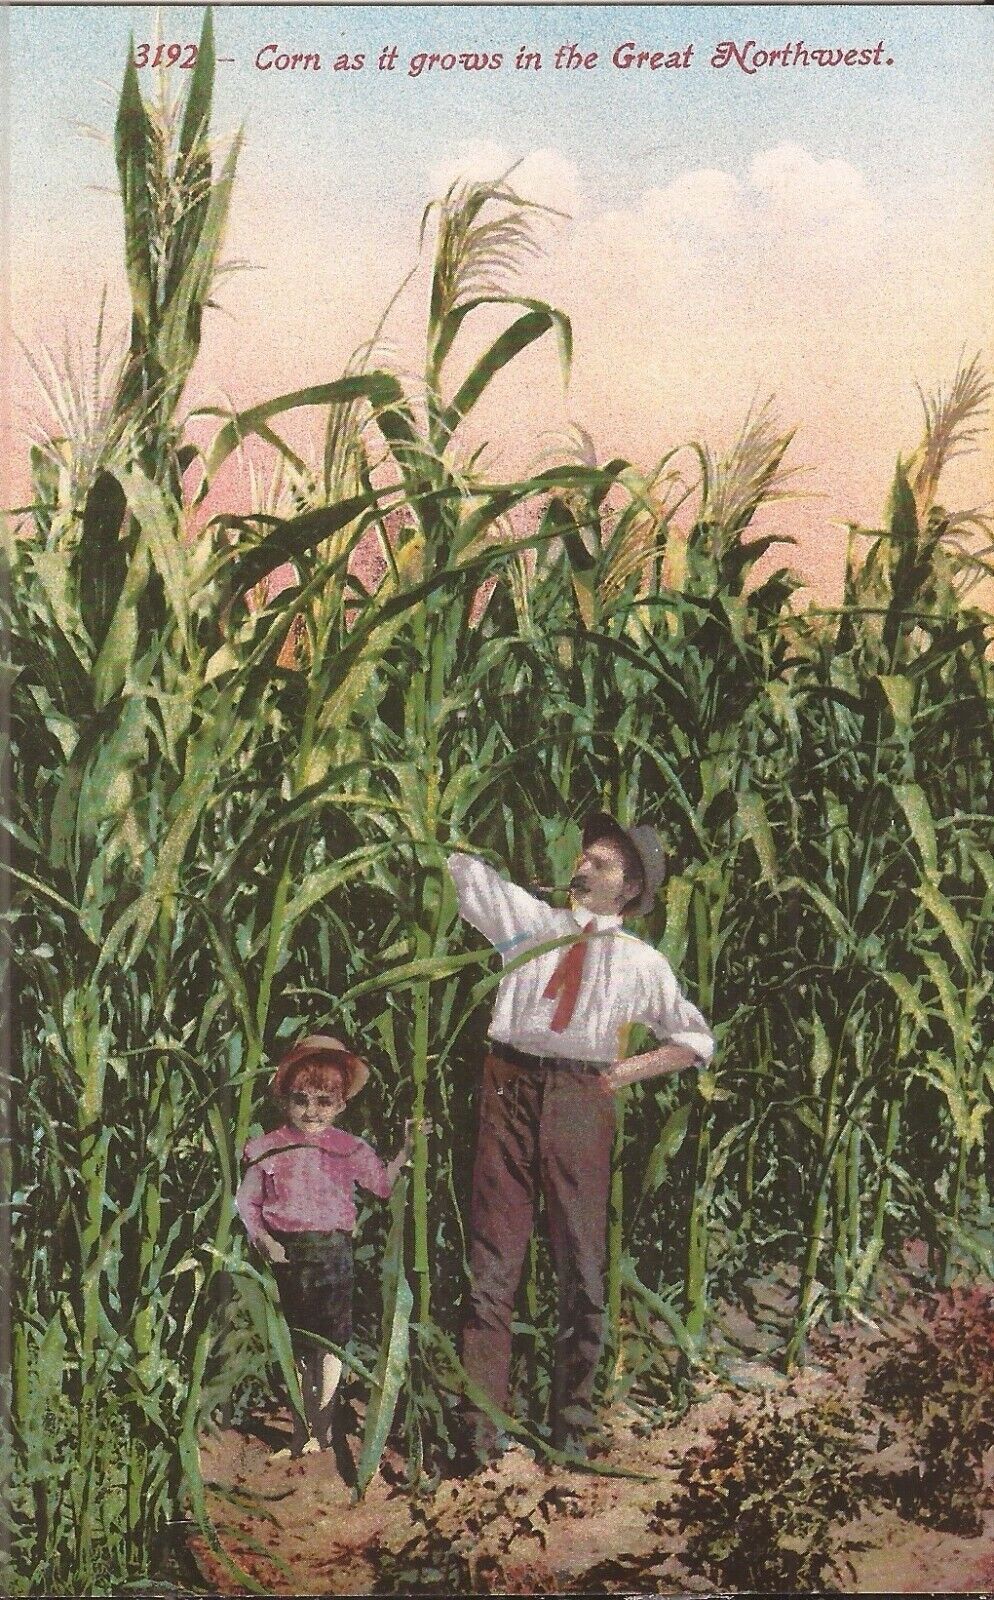 AGRICULTURE:  Corn from the Great Northwest